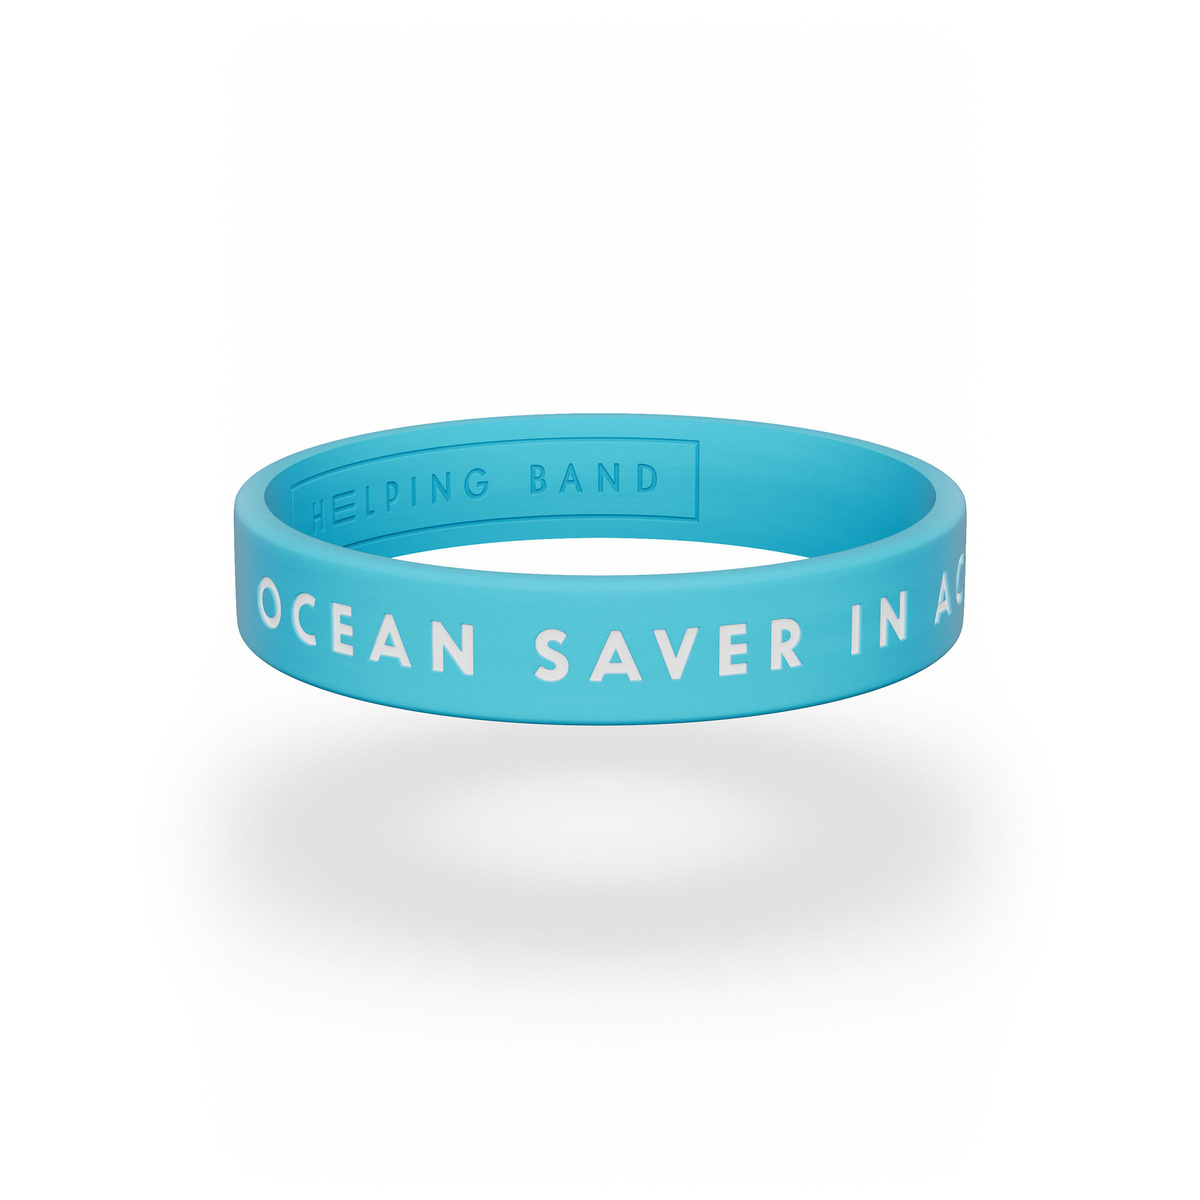 Image of Helping Band Bracciale Ocean Saver in Action